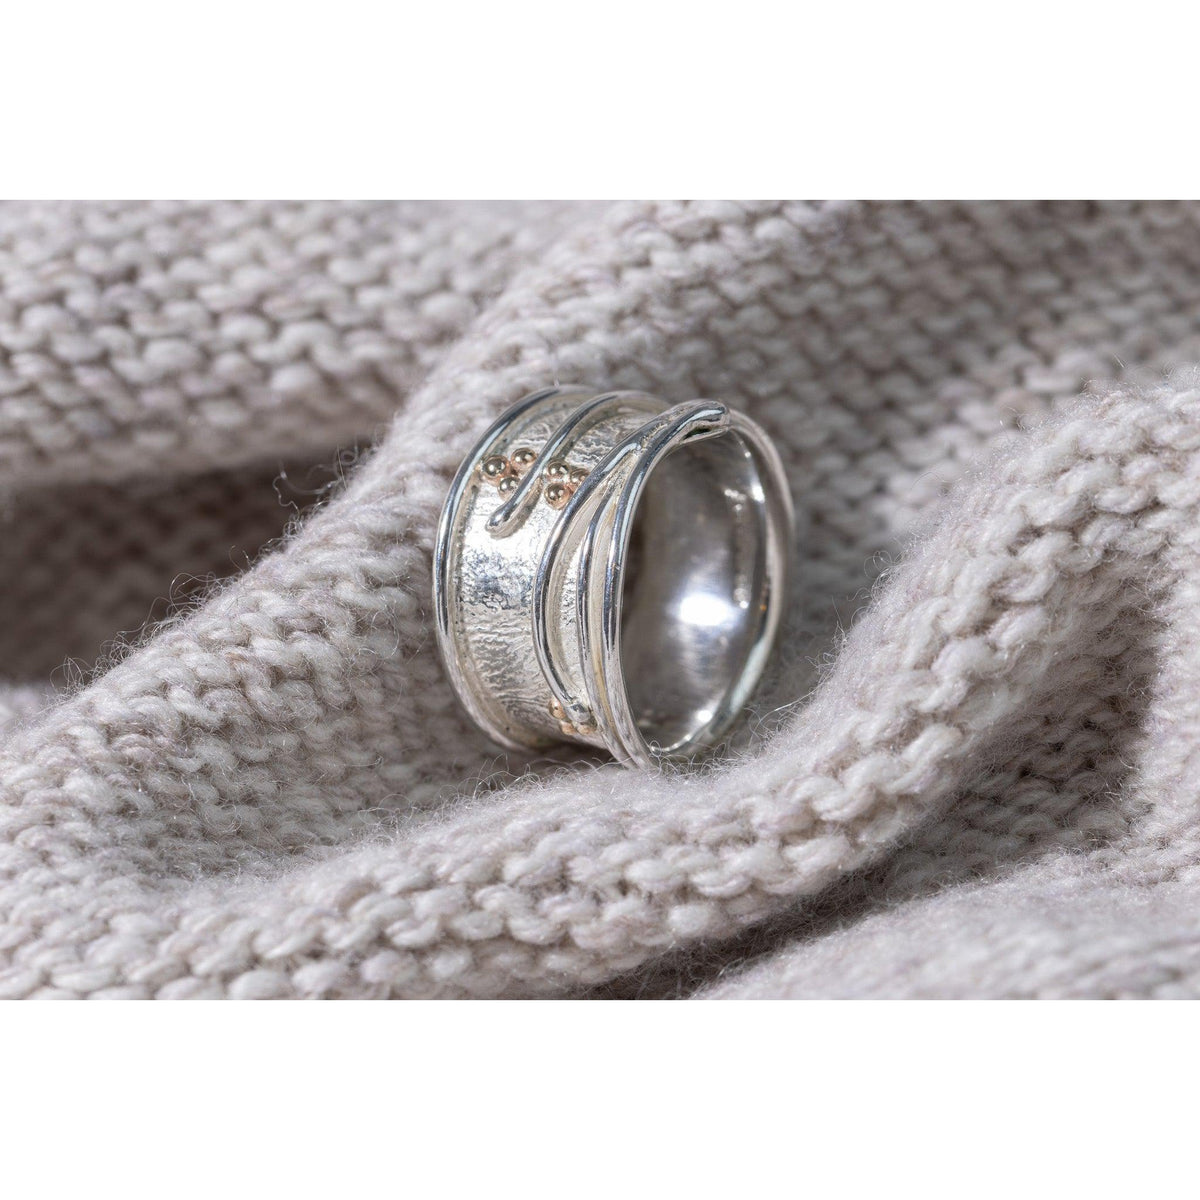 &#39;LG53 - Wide Silver Ring with Gold Beads&#39; by Les Grimshaw, available at Padstow Gallery, Cornwall